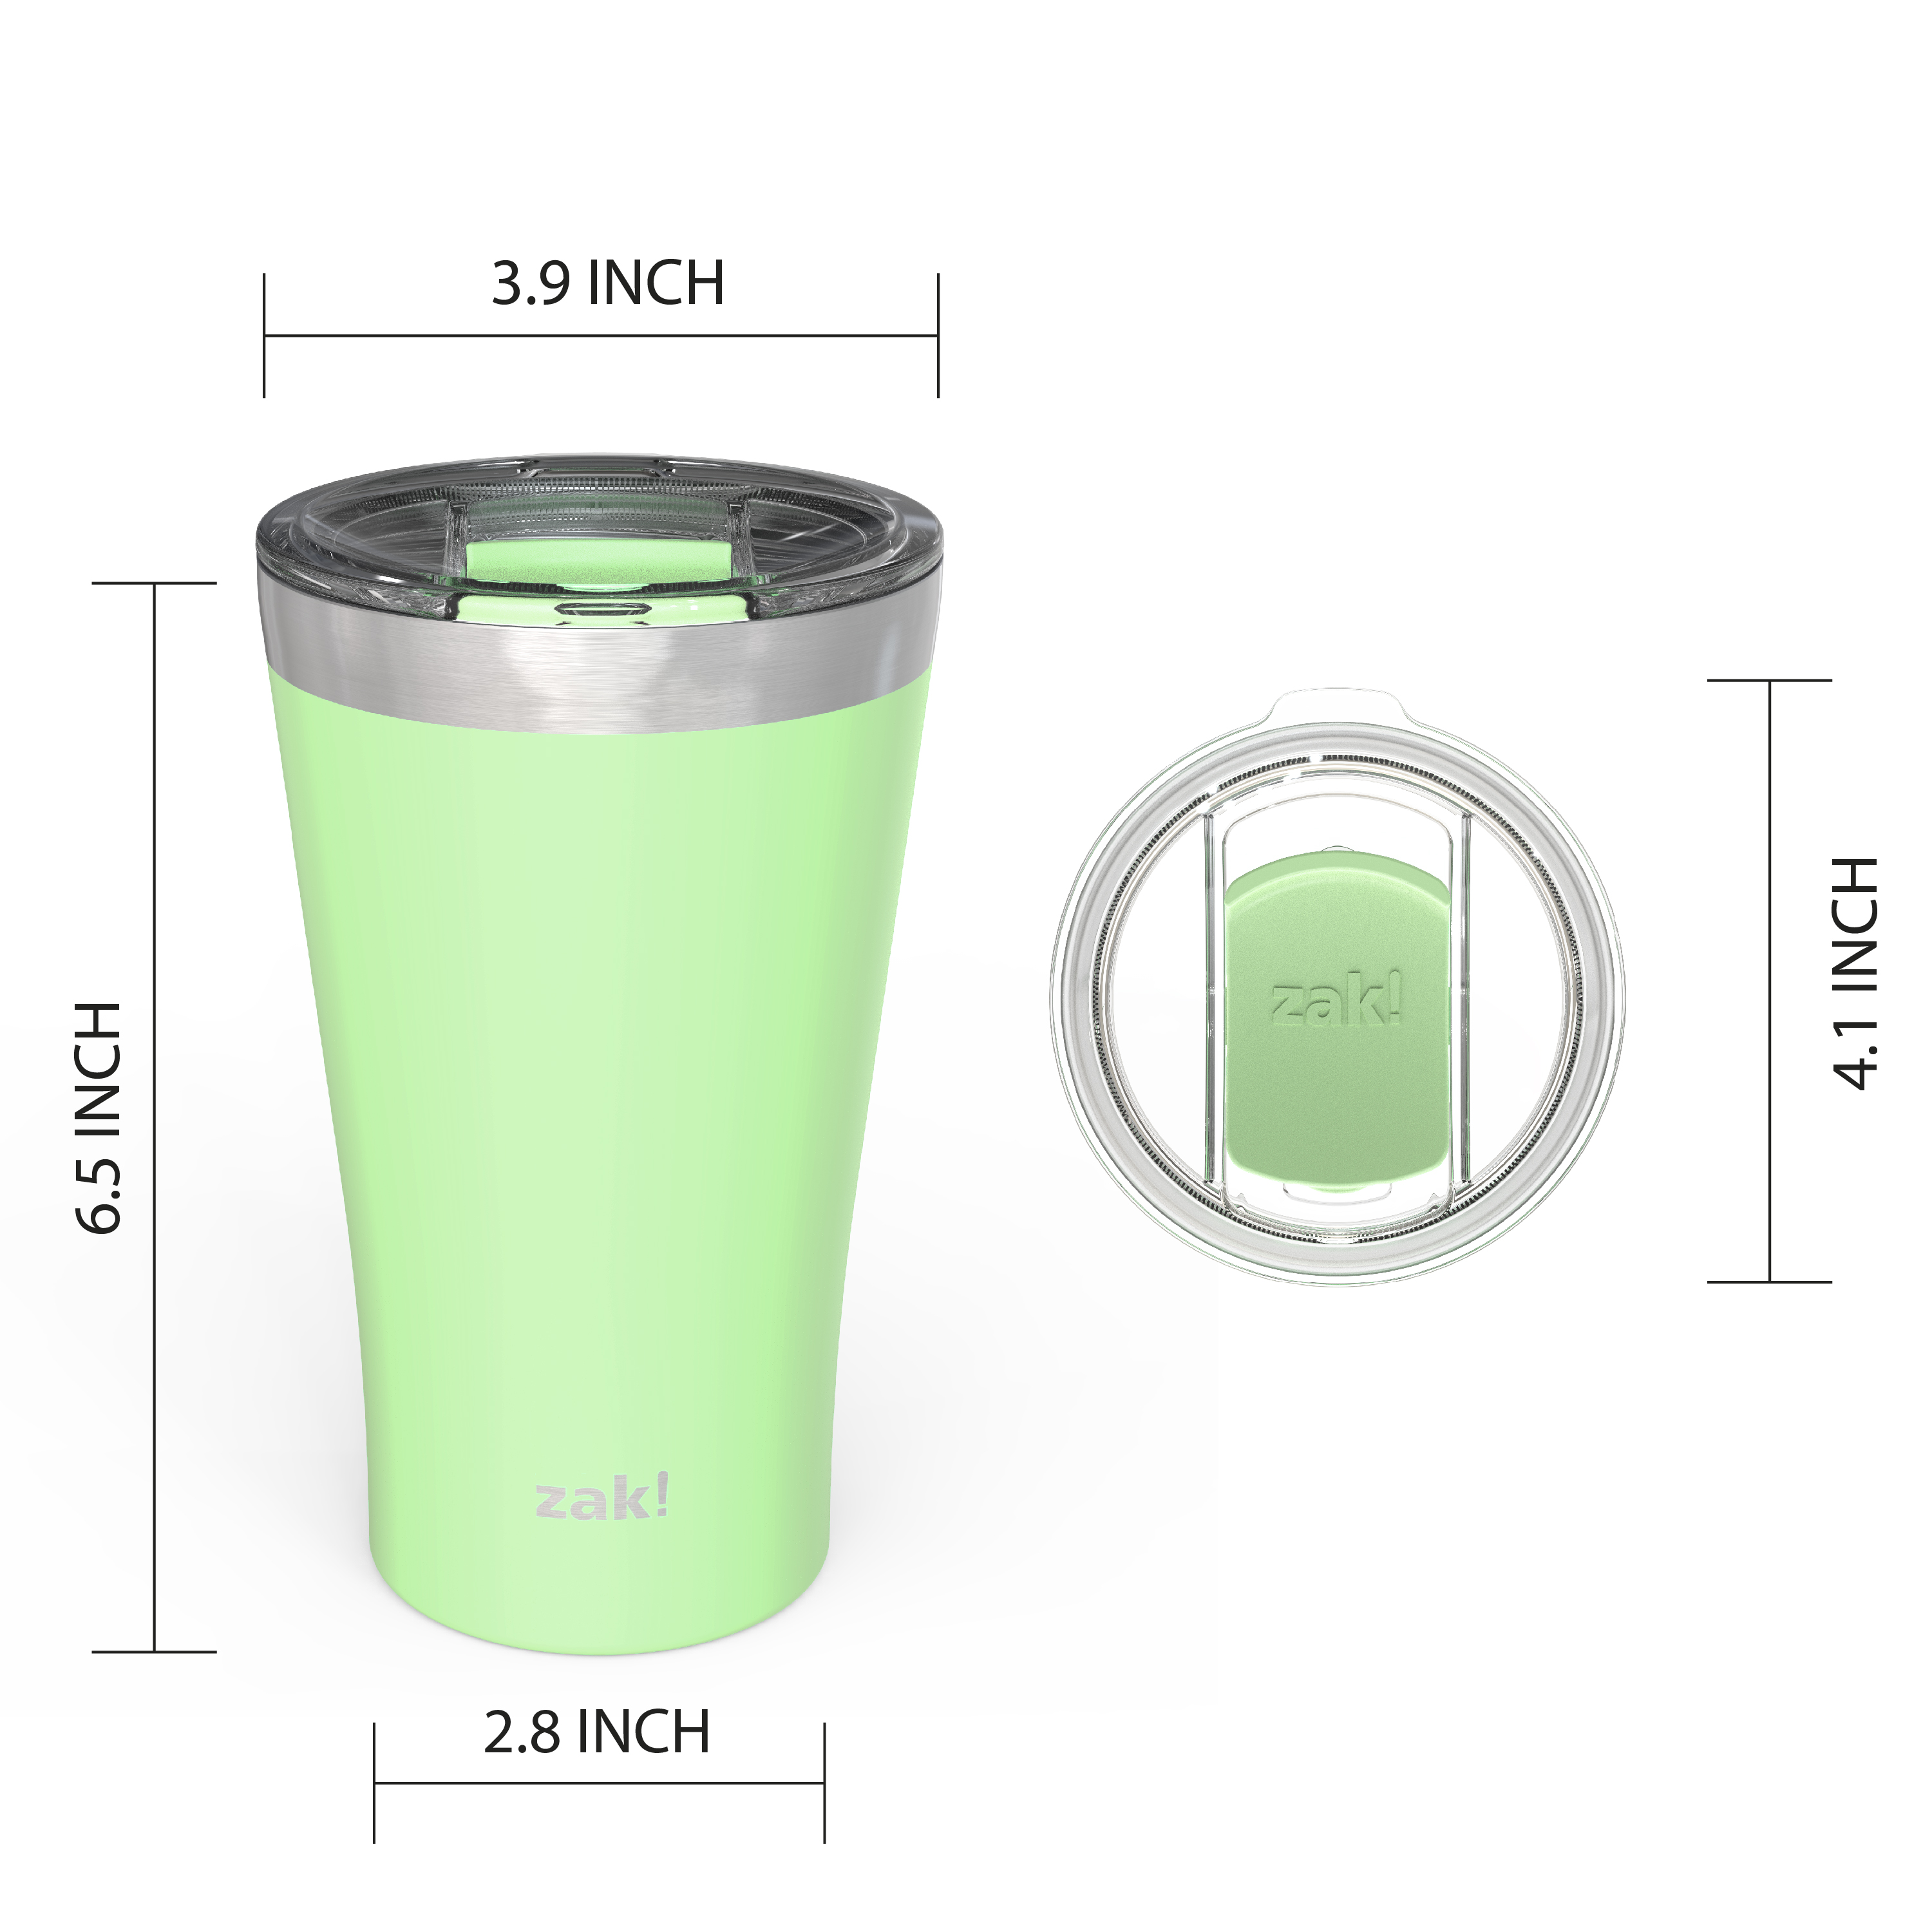 Zak Hydration 20 ounce Reusable Vacuum Insulated Stainless Steel Tumbler with Straw, Neo Mint slideshow image 2